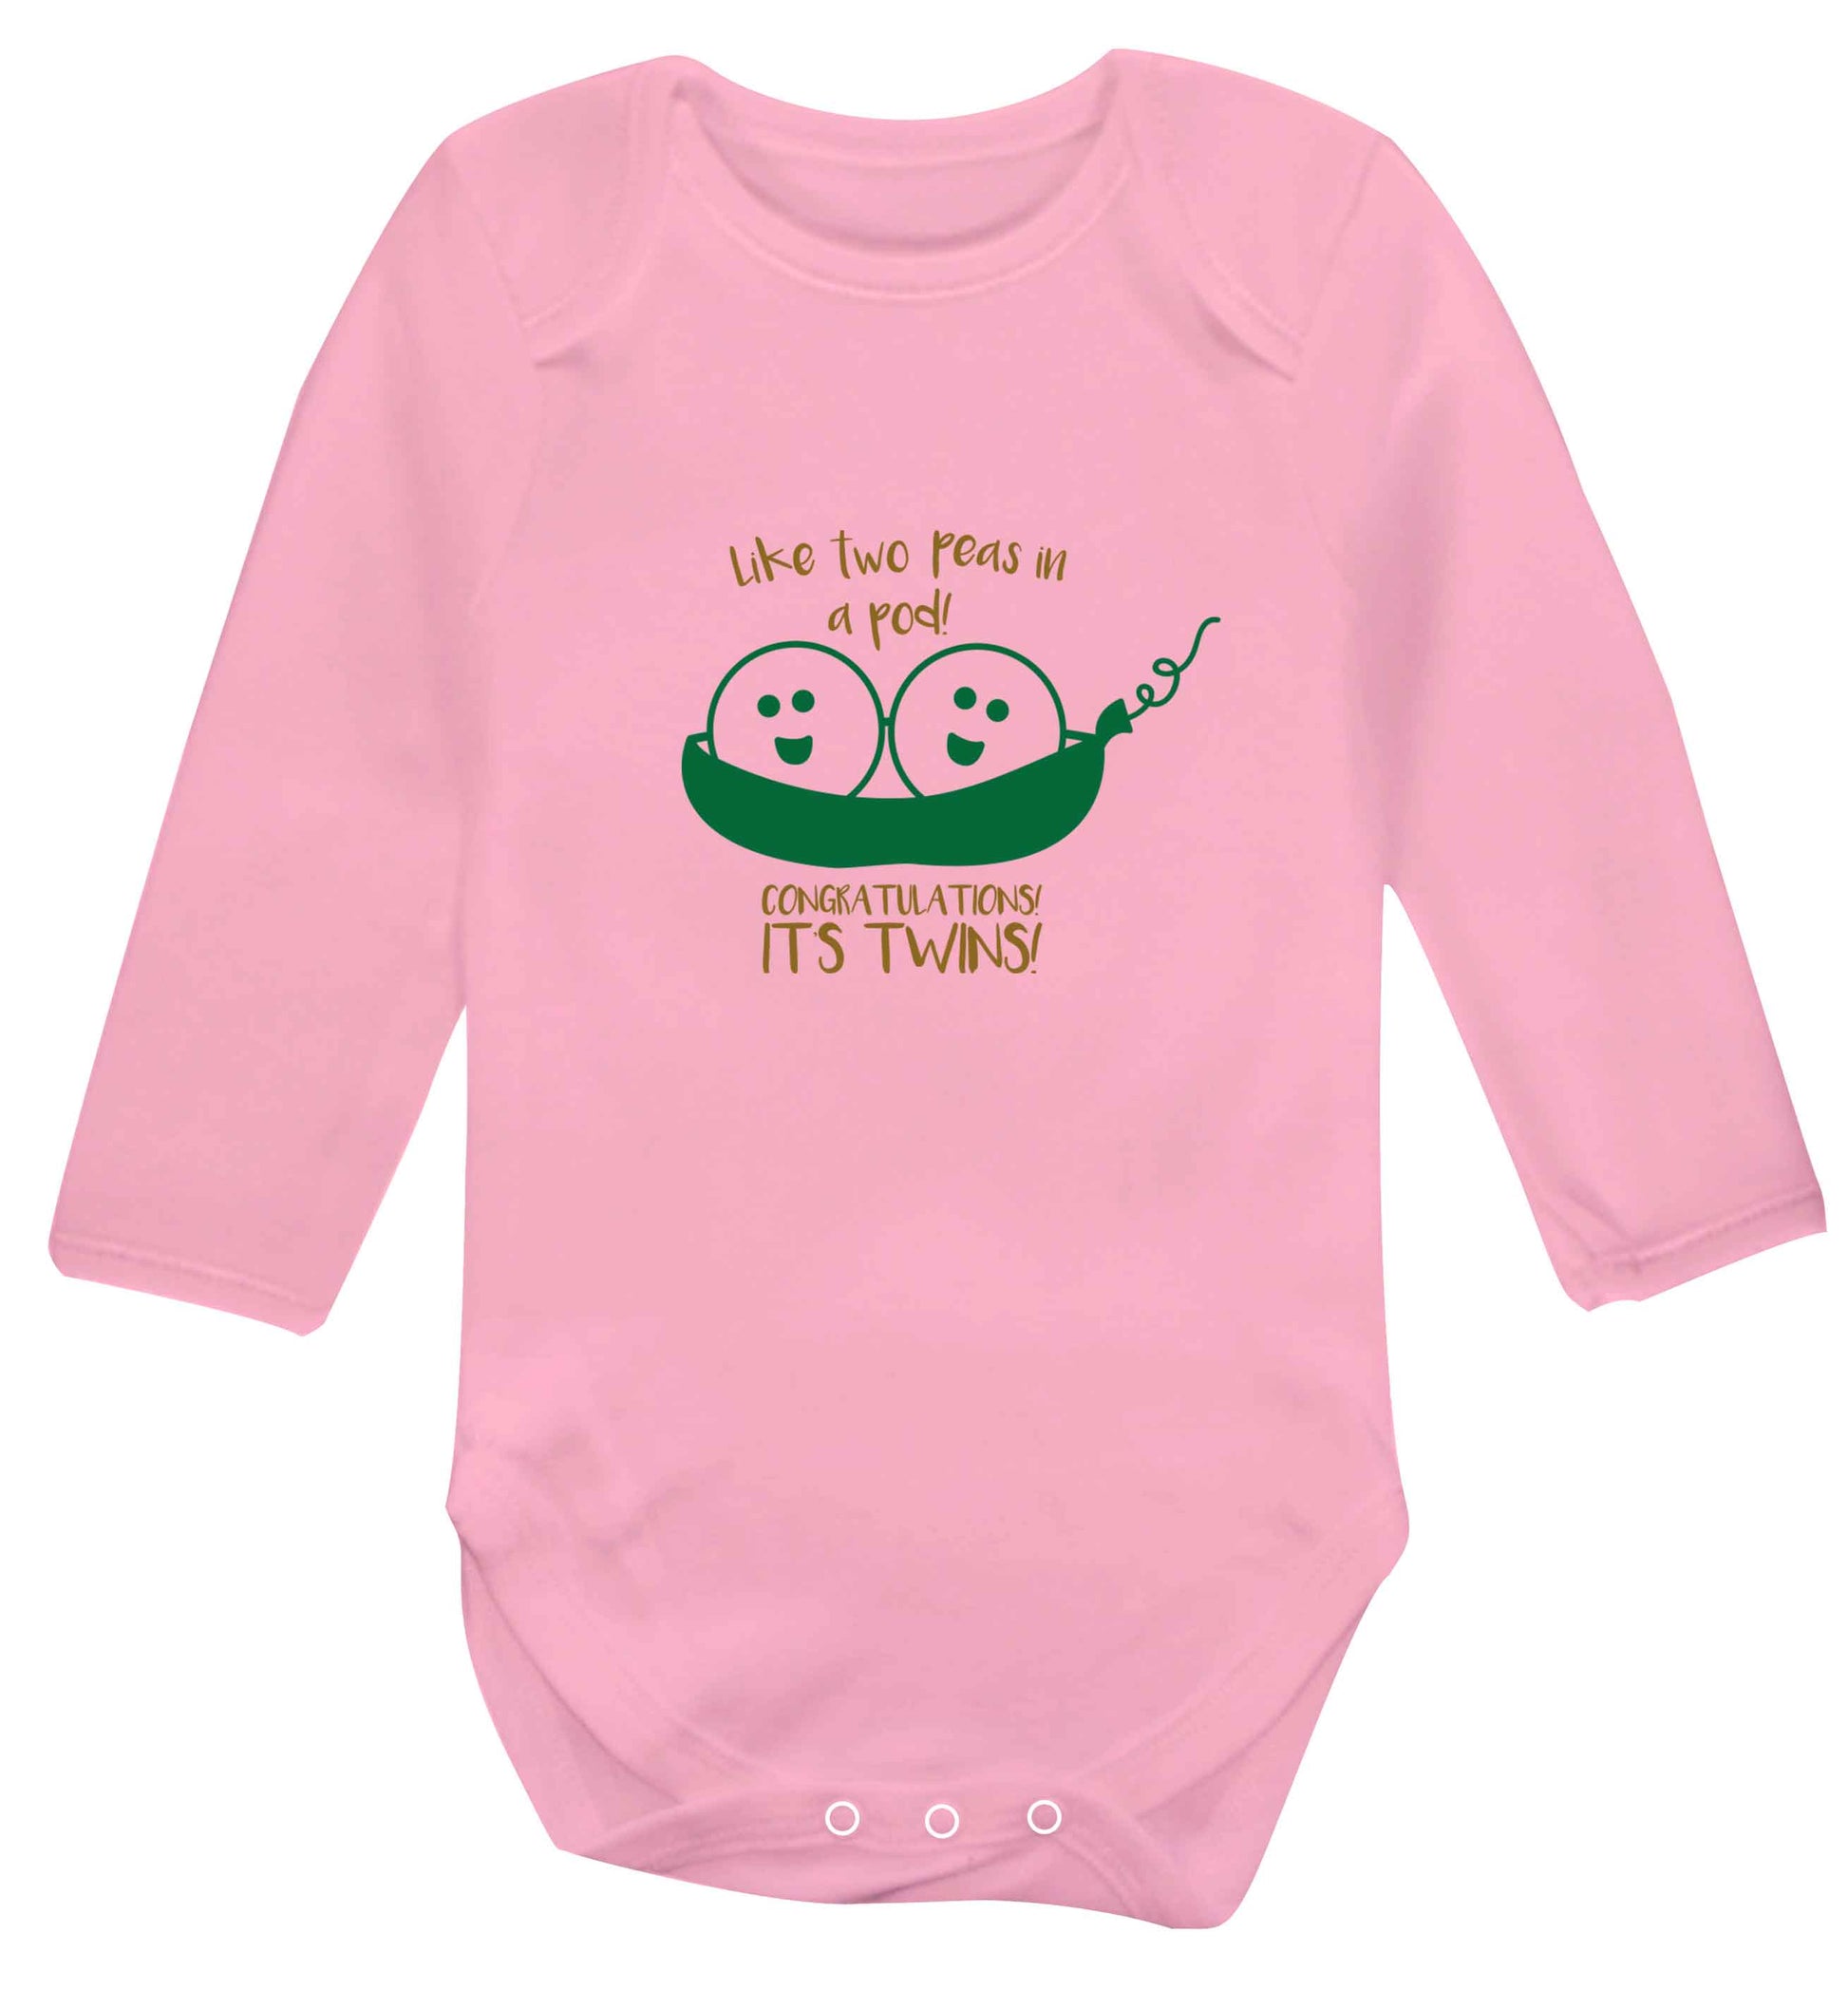 Like two peas in a pod! Congratulations it's twins! baby vest long sleeved pale pink 6-12 months